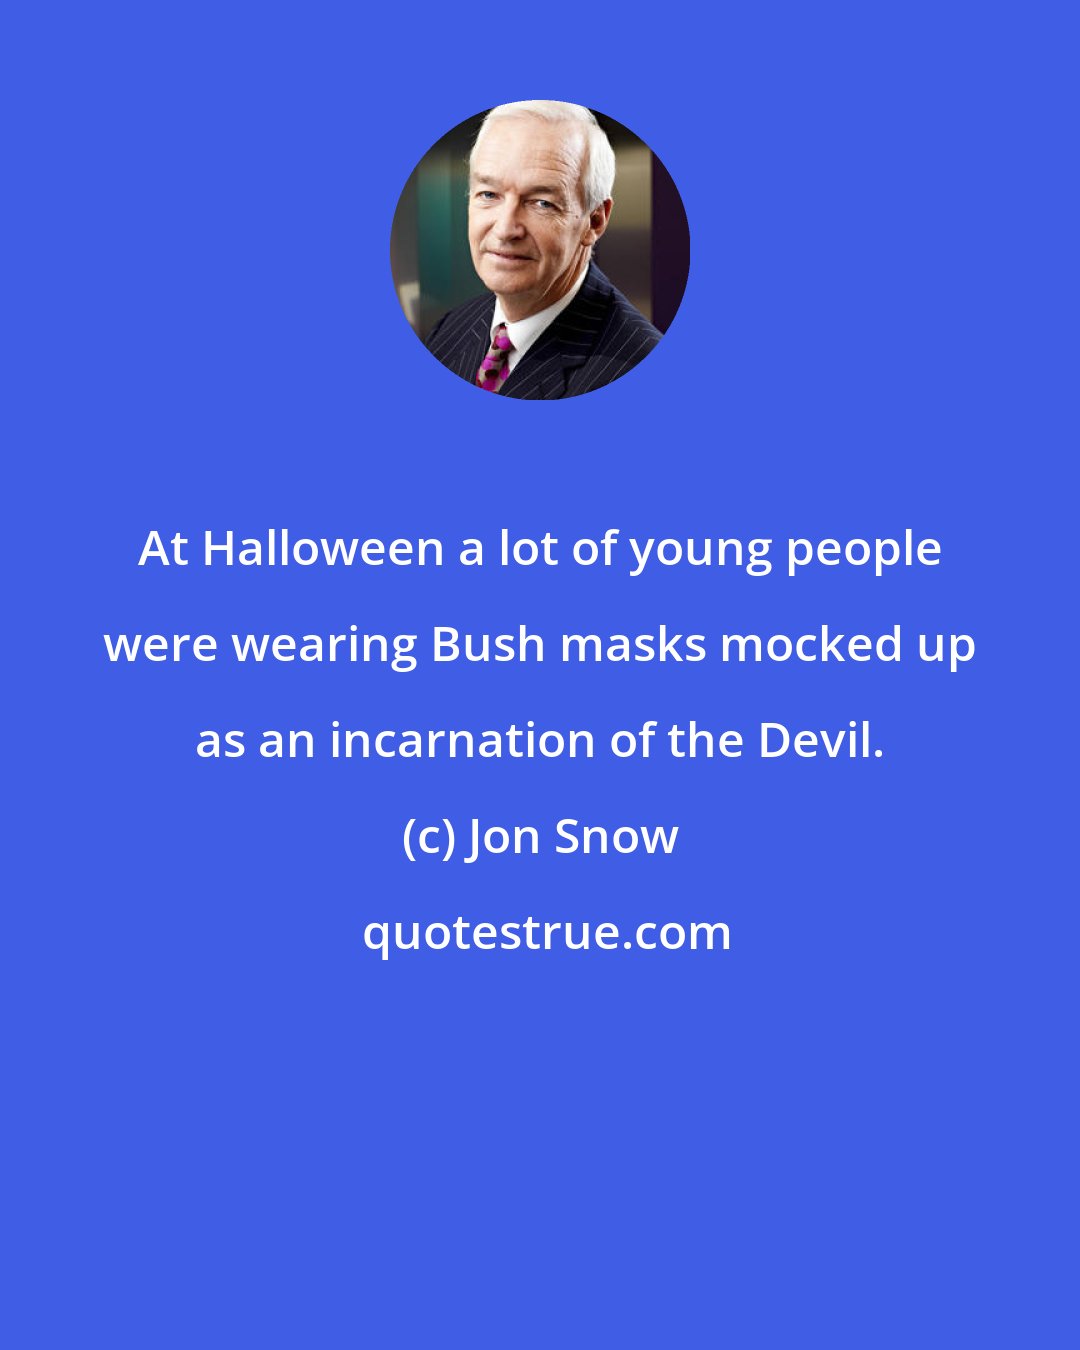 Jon Snow: At Halloween a lot of young people were wearing Bush masks mocked up as an incarnation of the Devil.